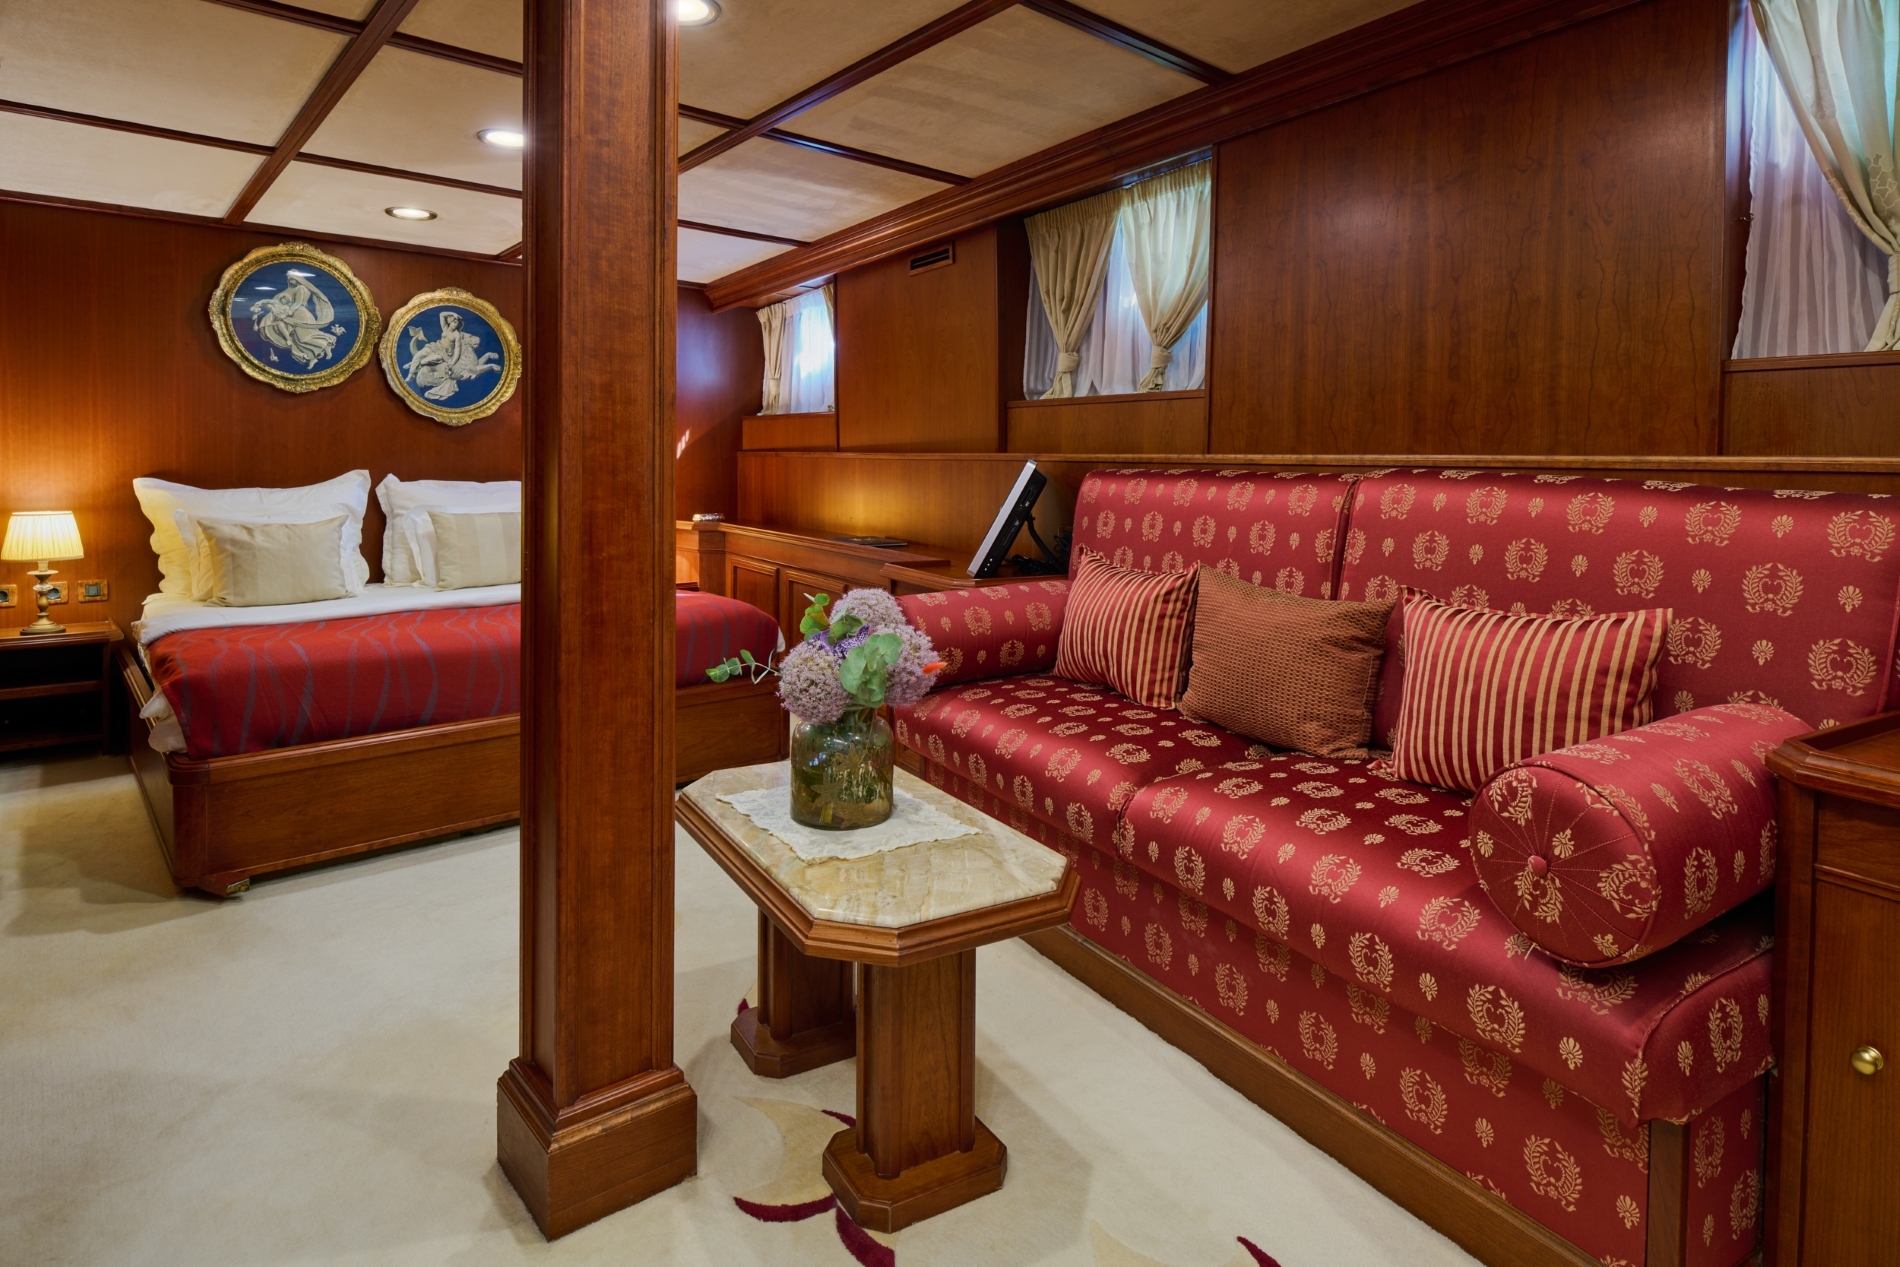 Master apartment with two staterooms and a shared saloon